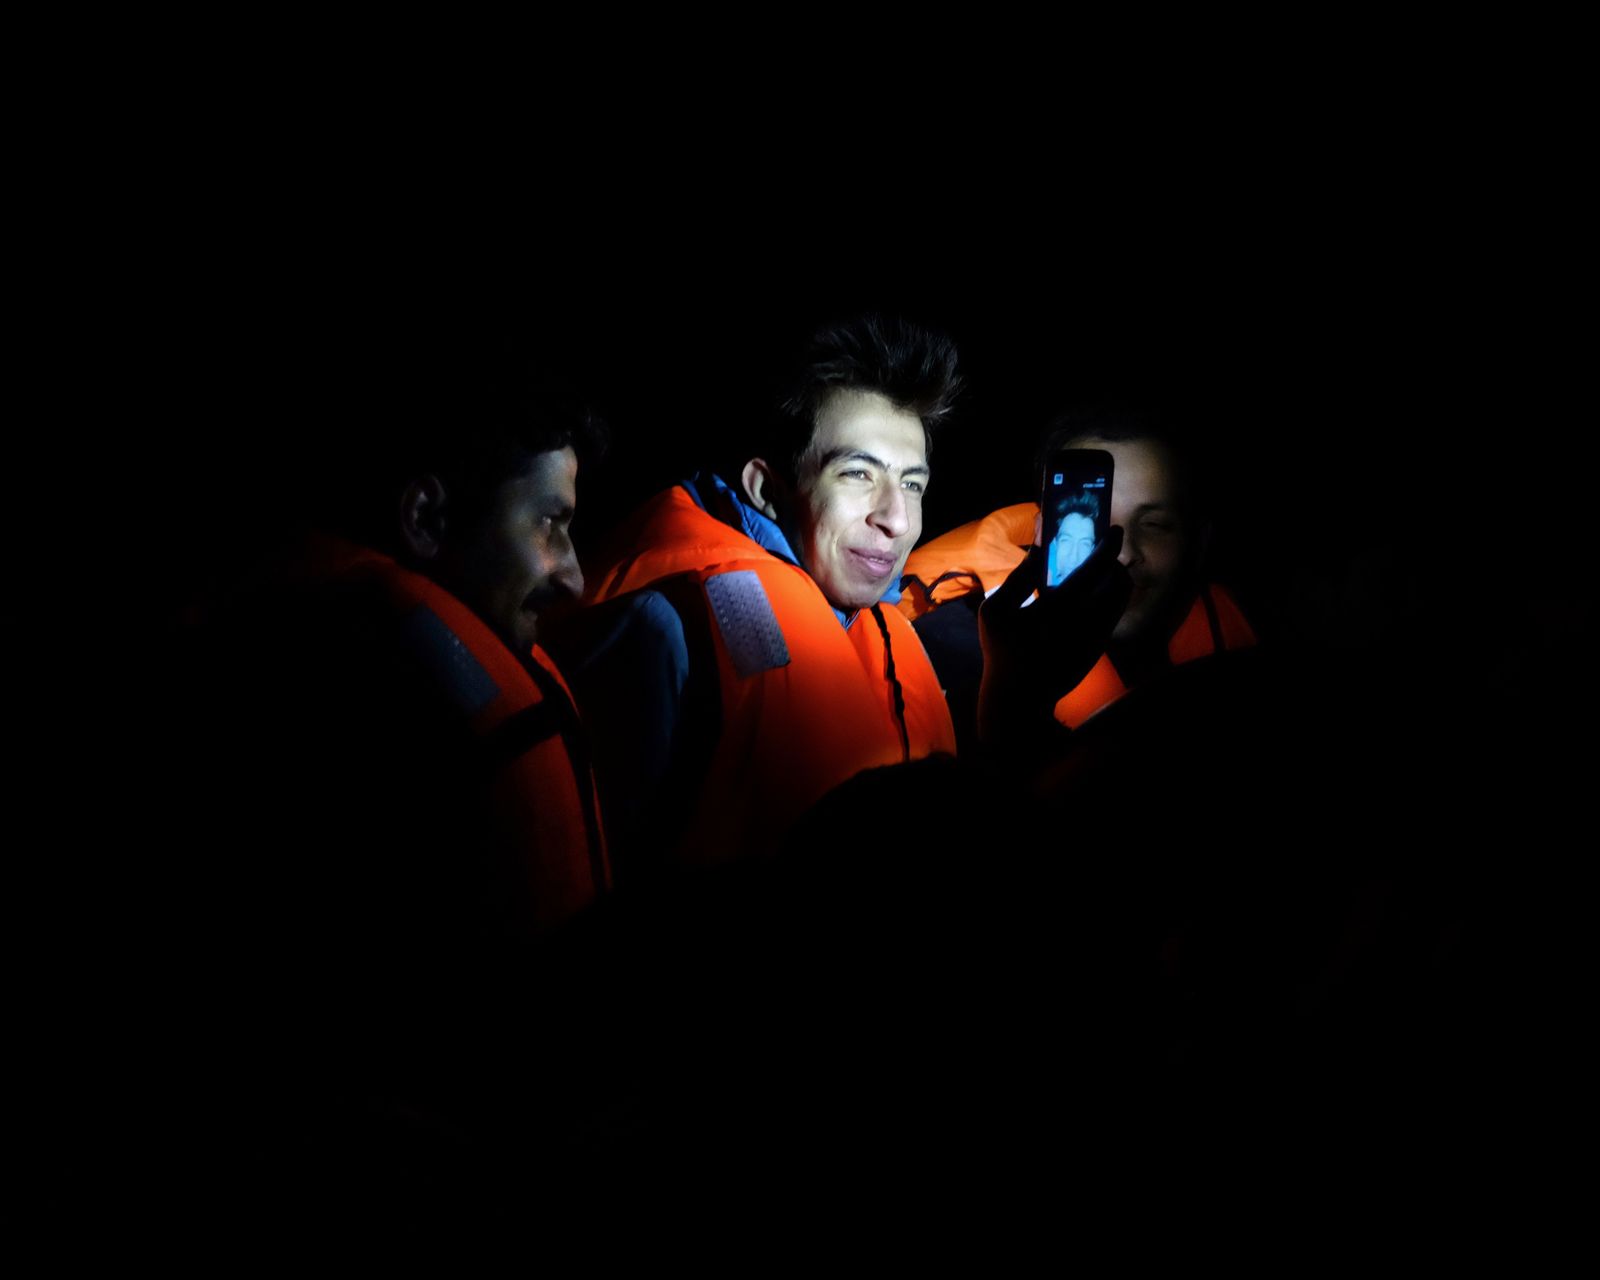 © Francois Tariq Sardi - Image from the Breaking Borders 2 - Turkey to Greece photography project